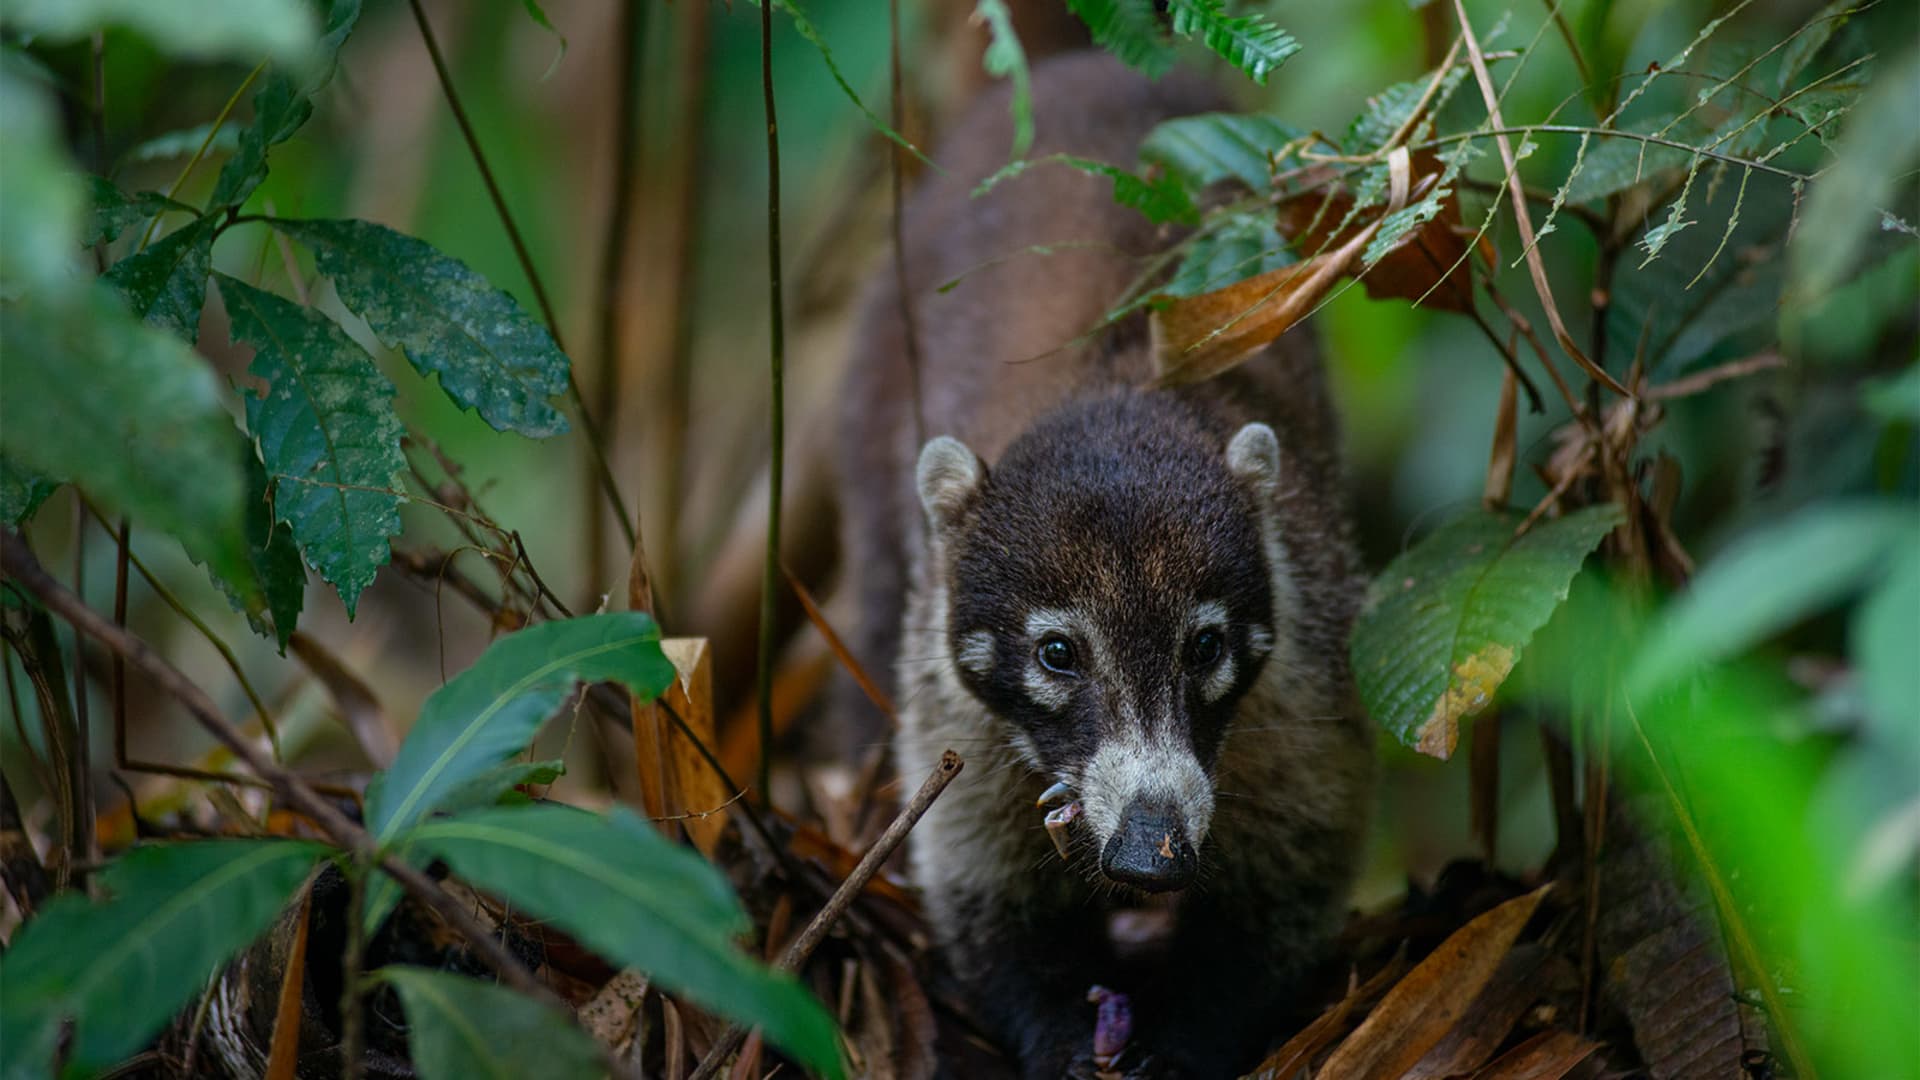 A coati photographed in the jungles of Costa Rica during an expedition cruise shore excursion.